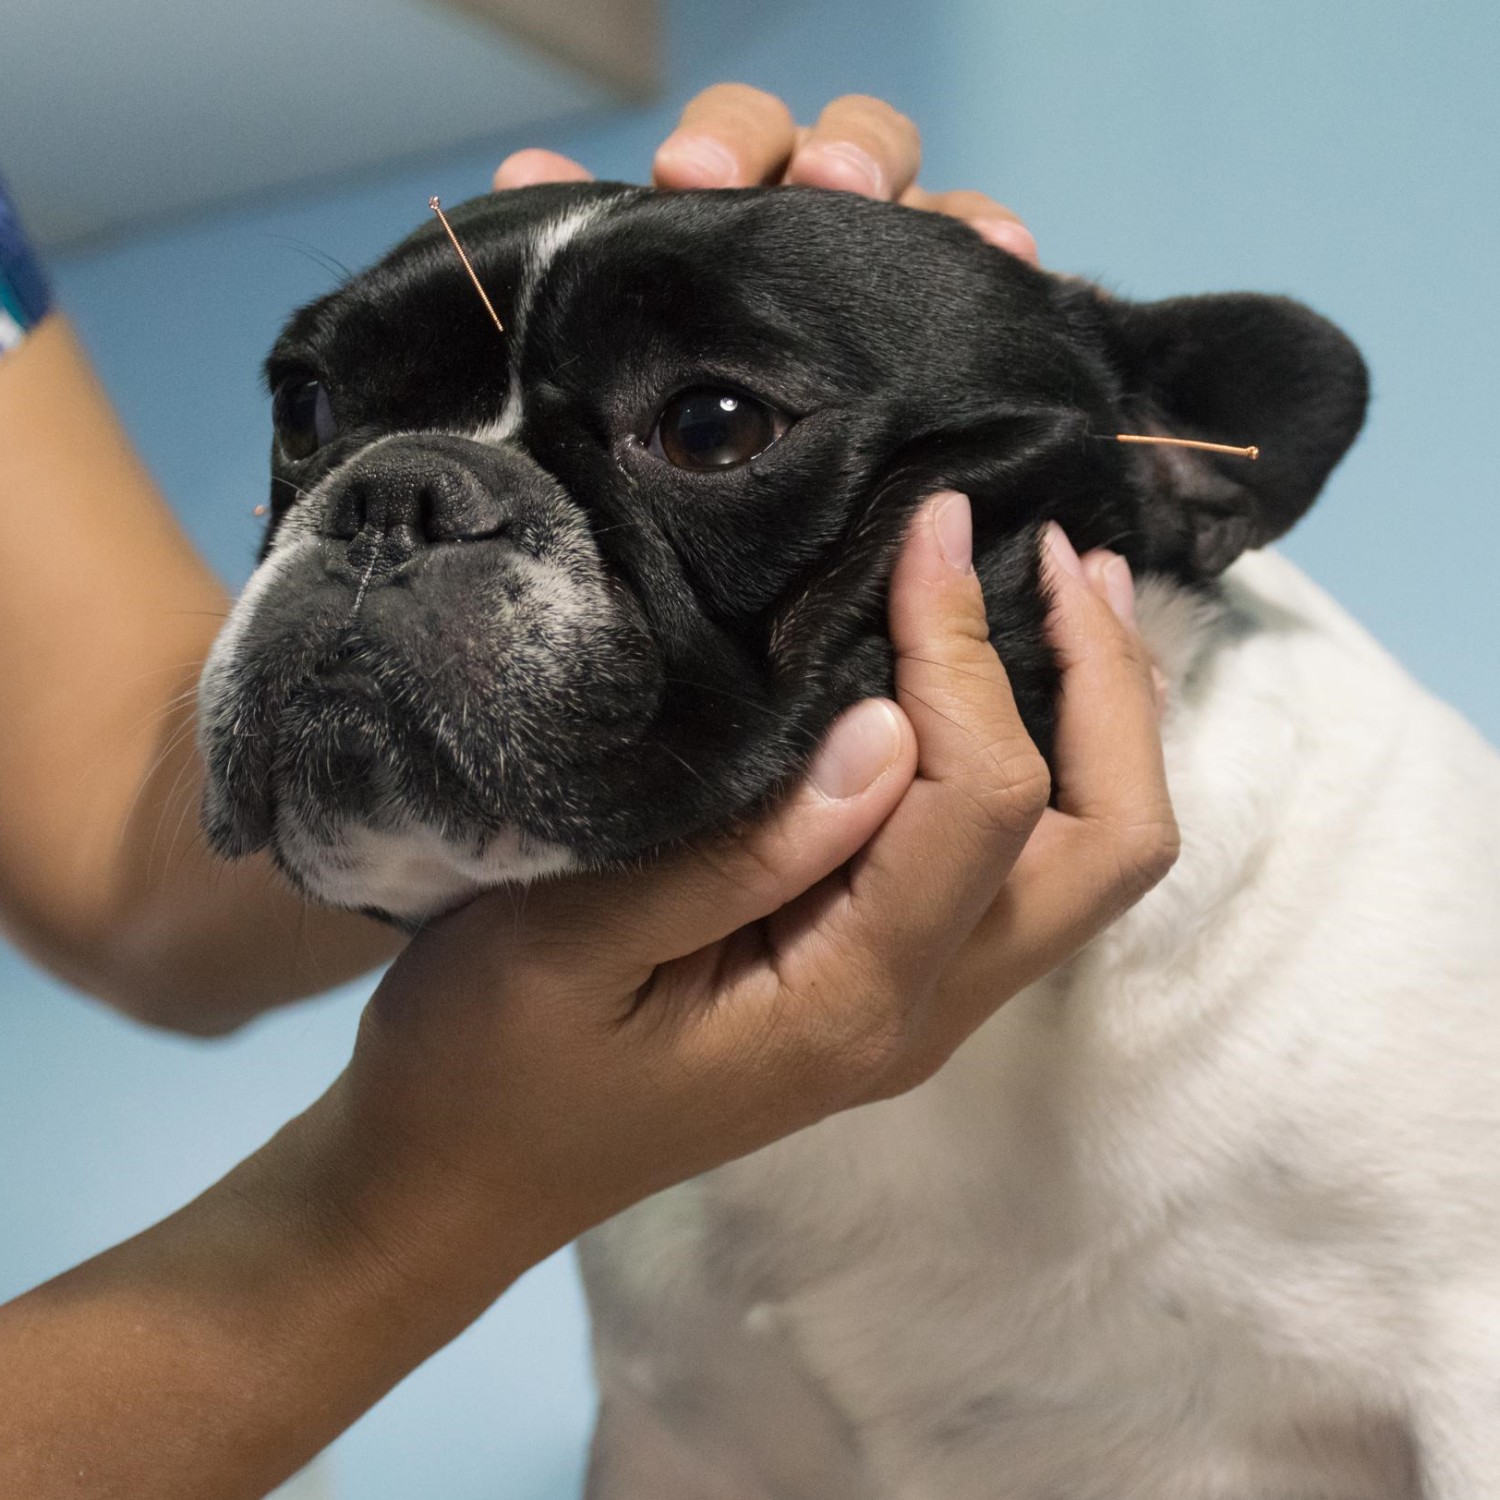 Dog Receiving Acupuncture Treatment